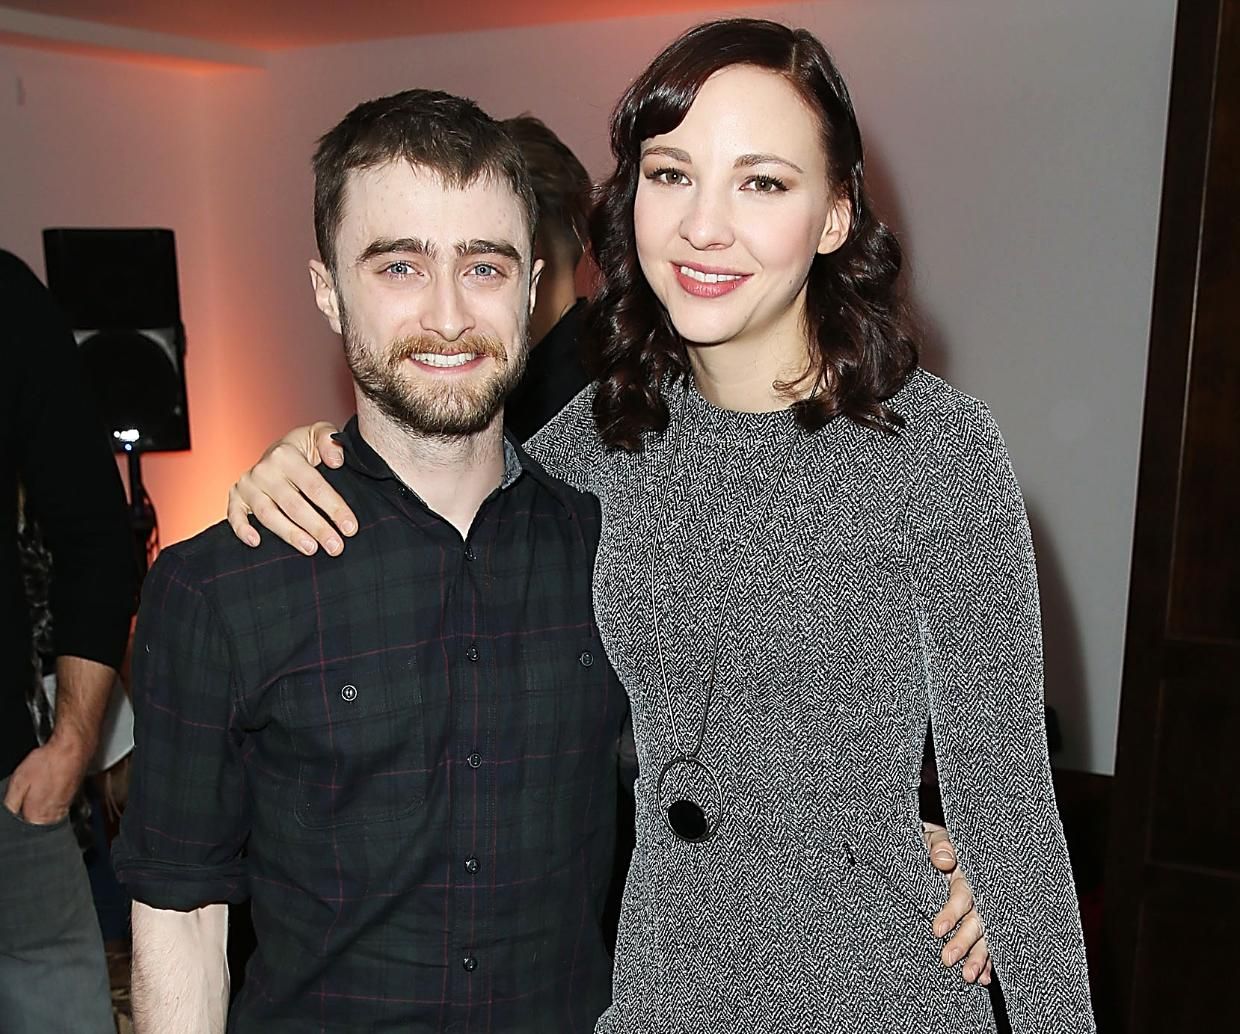 Danielle Radcliffe talked about his relationship with long-time girlfriend Erin...